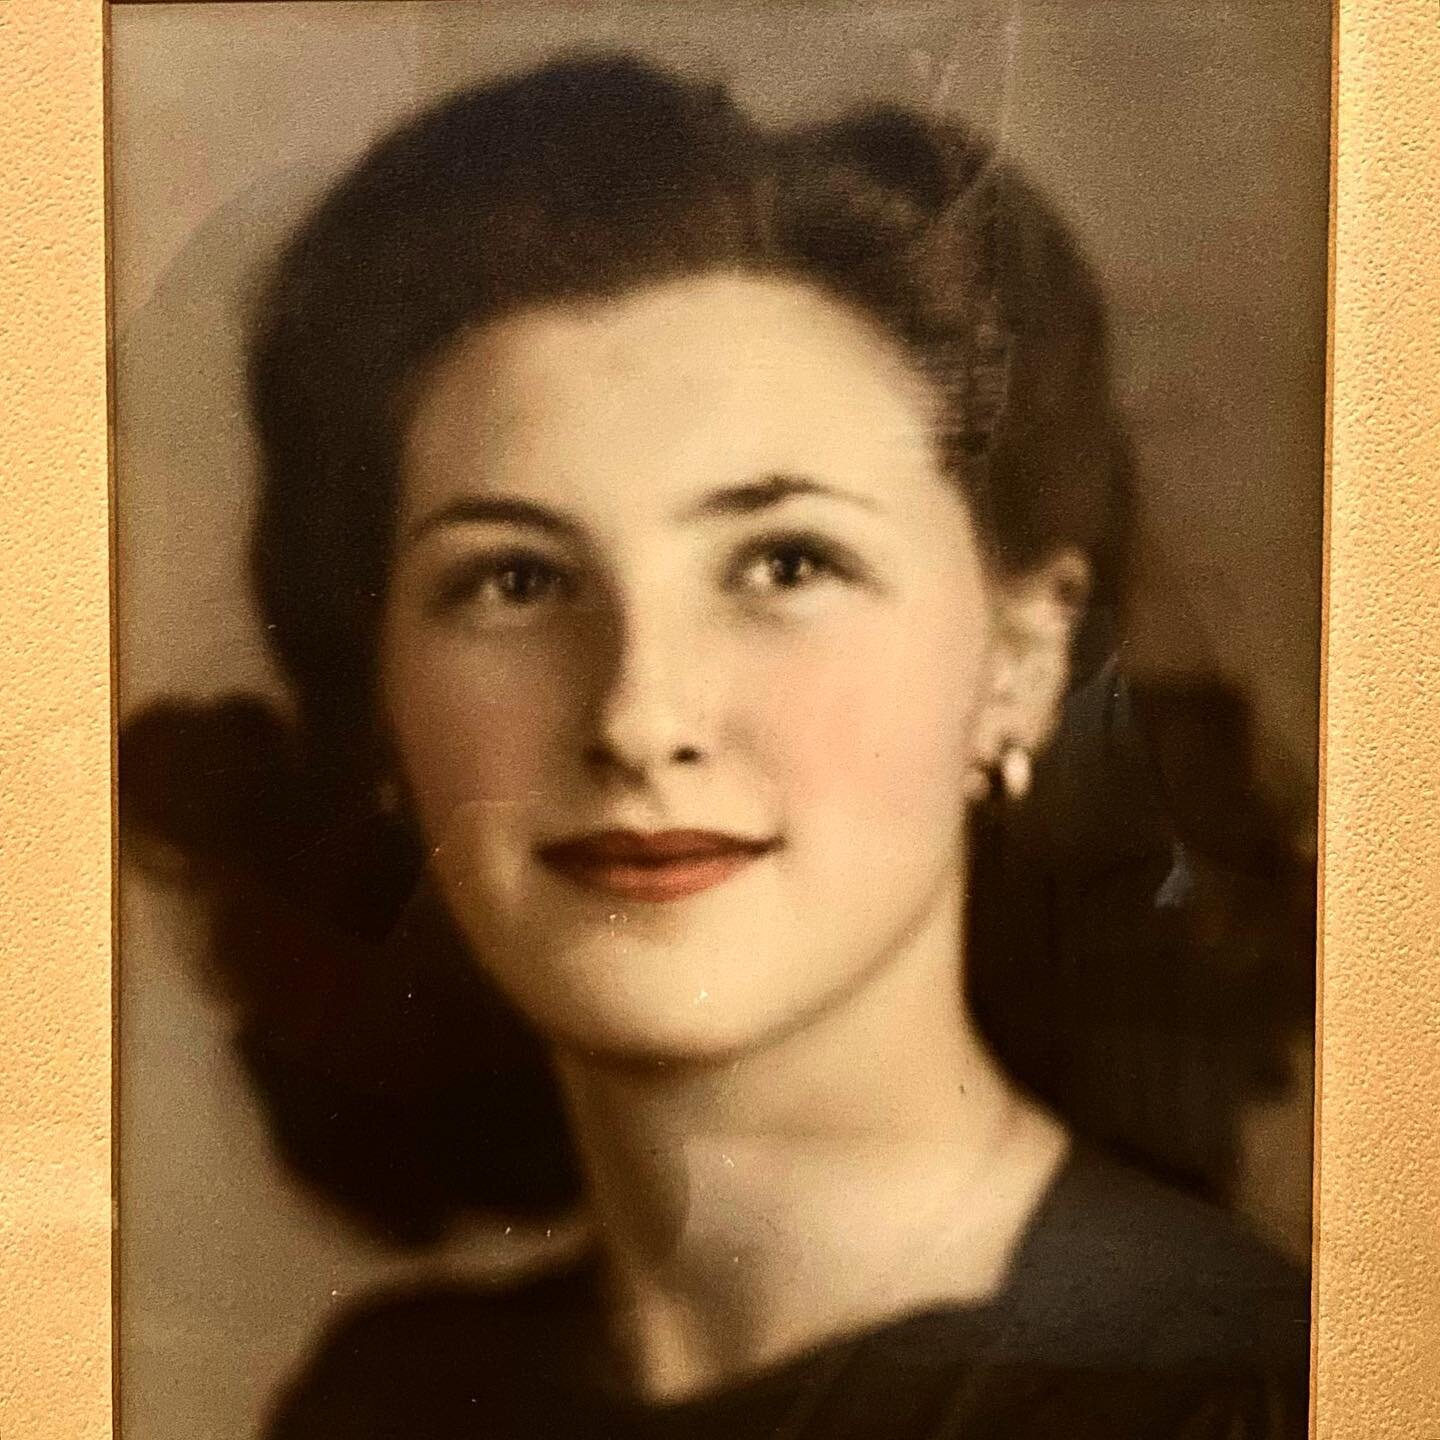 🌹Happy birthday to my brilliant, beautiful, and bodacious Mommy🌹 #mom #happybirthday #love #missyou #beautiful #madre #お母さん　#母　#m&egrave;re